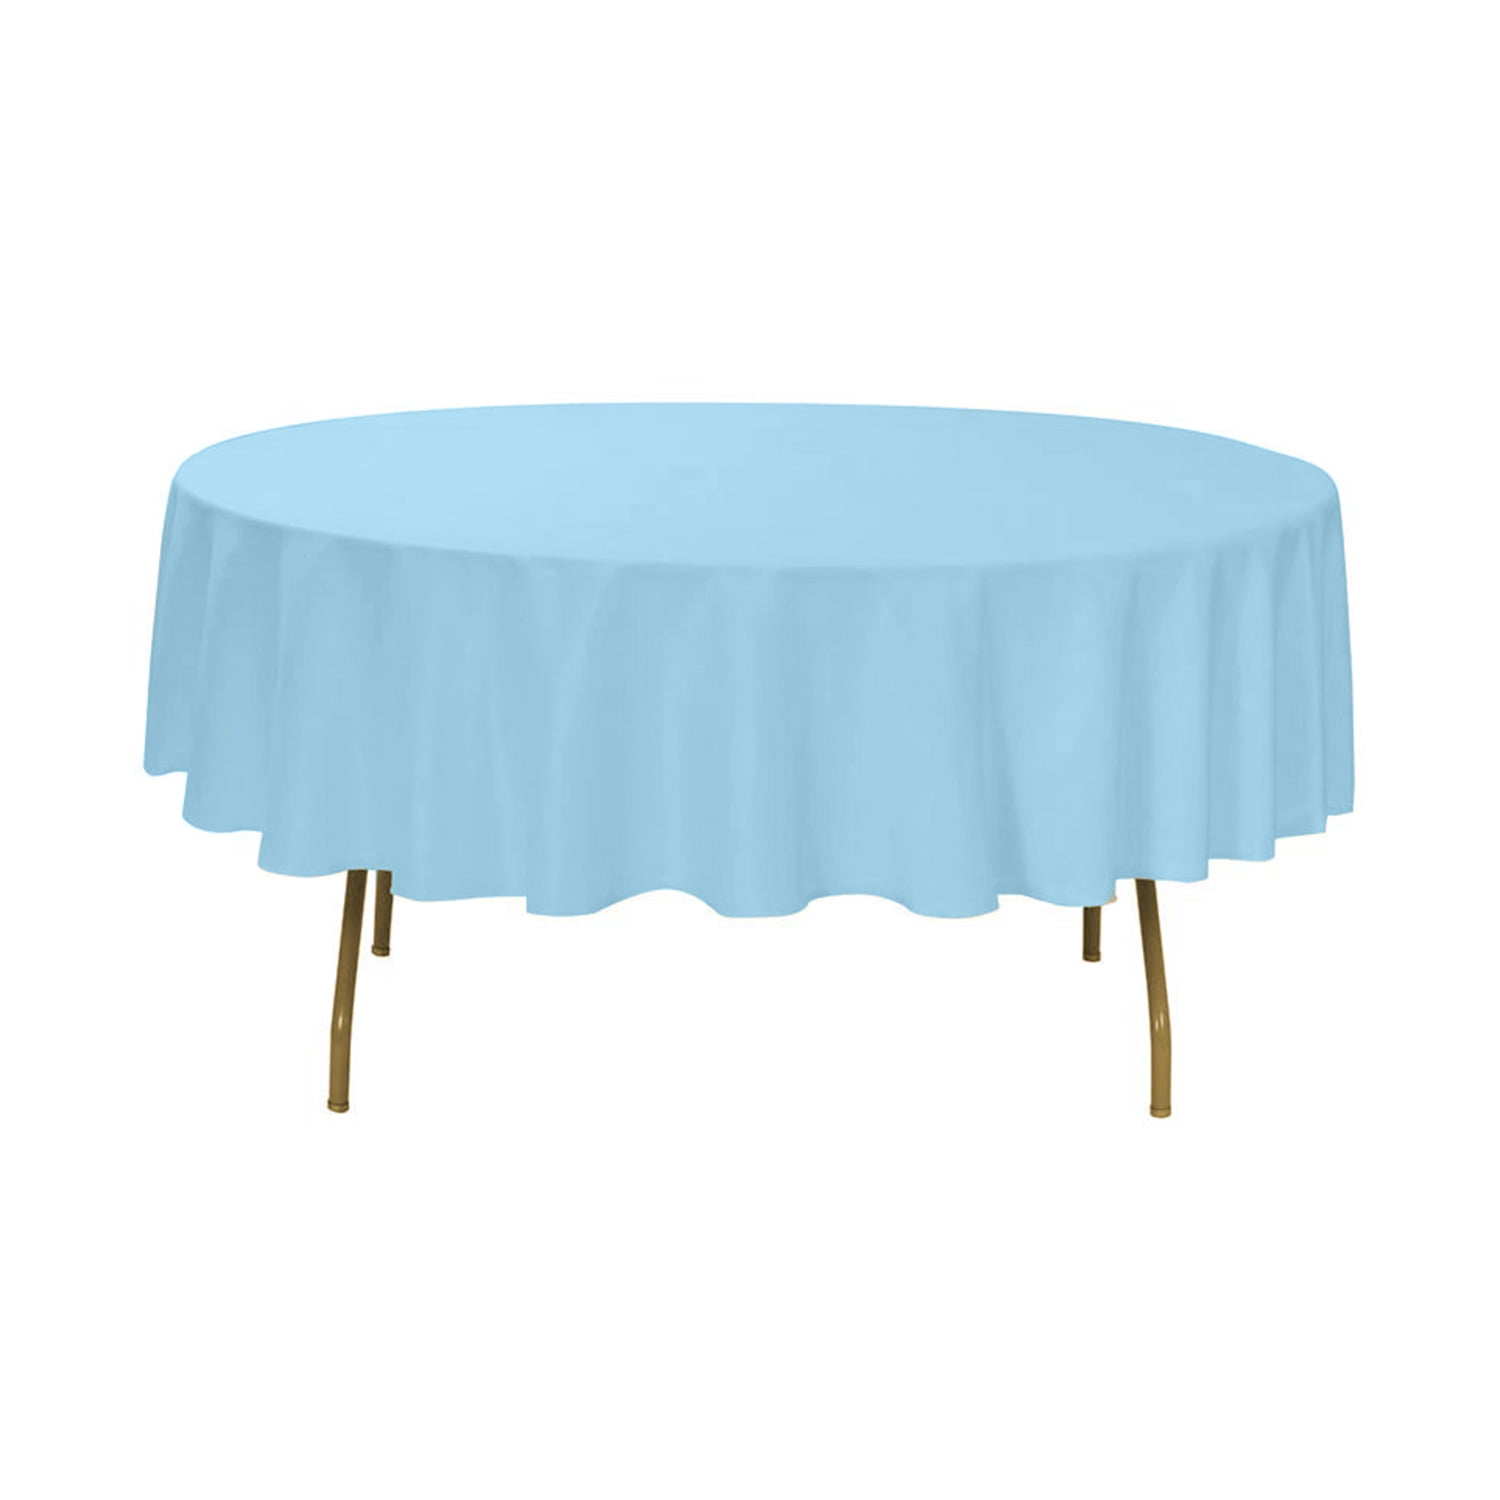 Your Chair Covers 90 Inch Round, How Big Is A 90 Inch Round Tablecloths